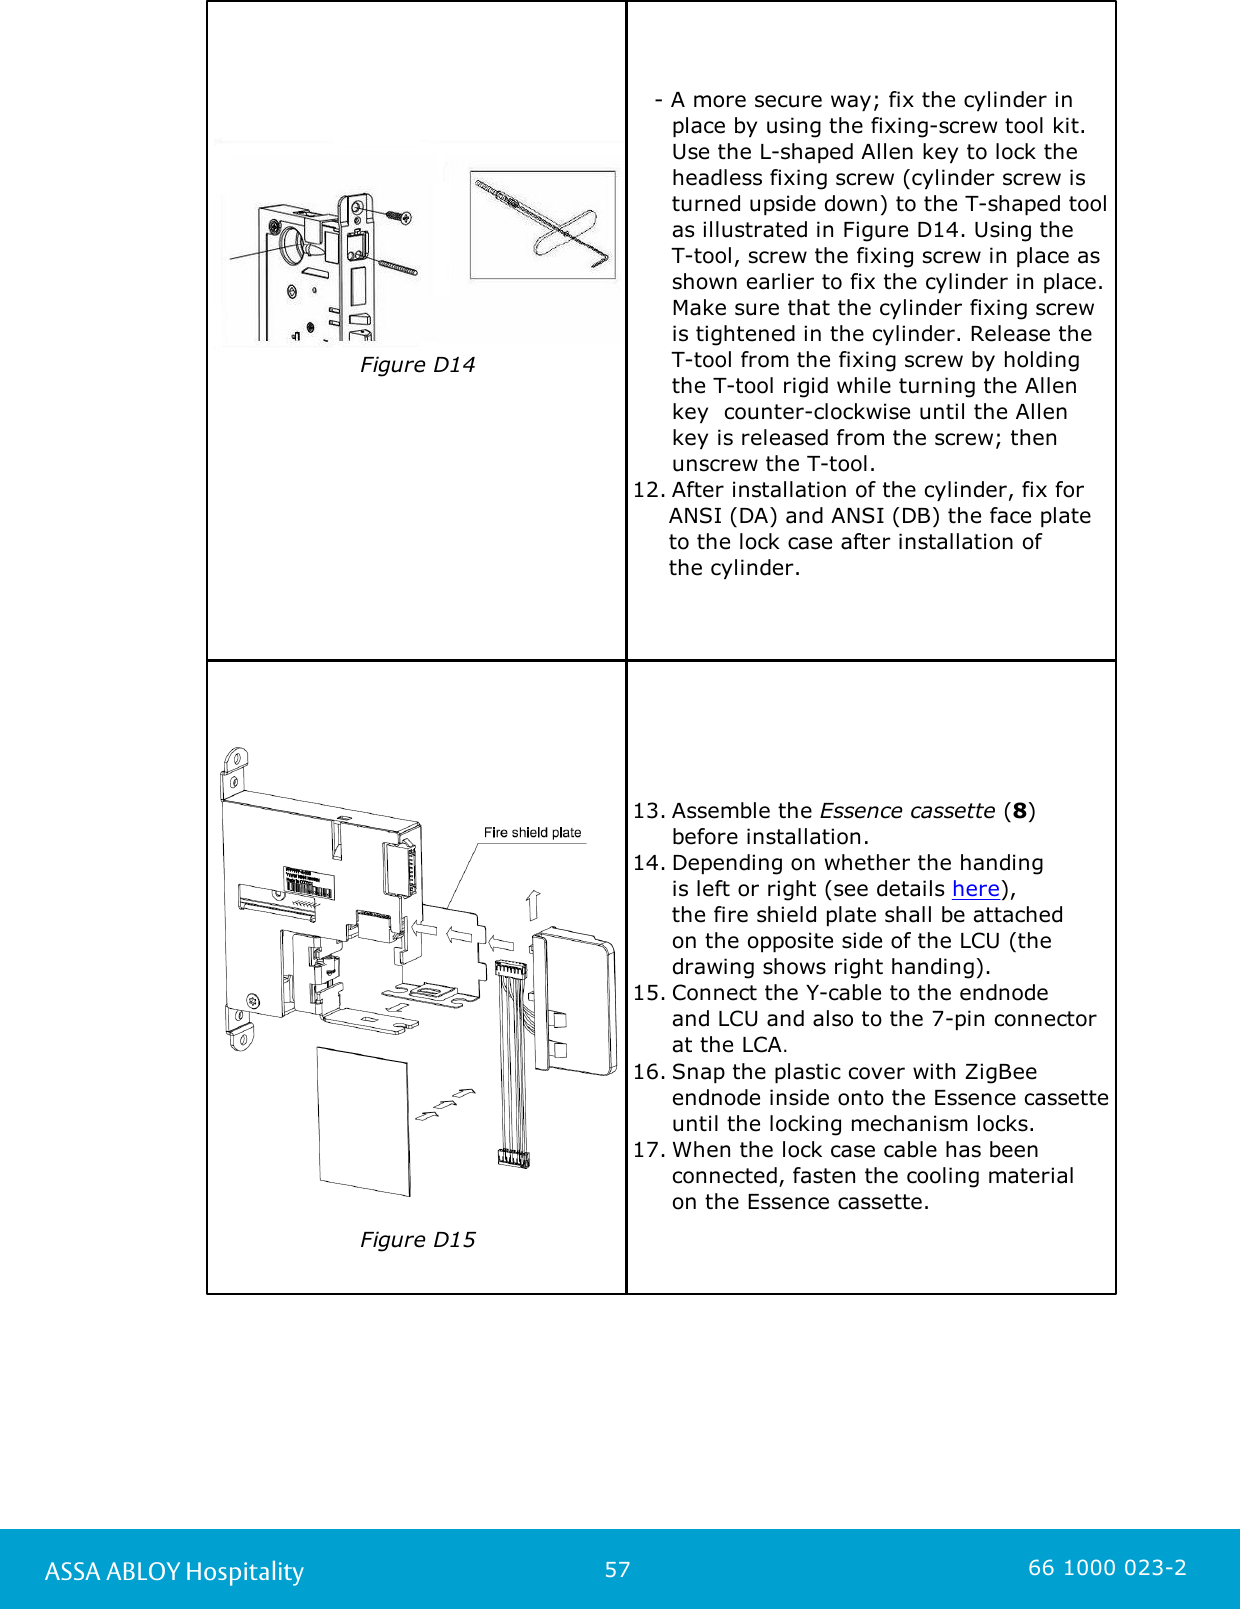 57ASSA ABLOY Hospitality 66 1000 023-2Figure D14                      - A more secure way; fix the cylinder in place by using the fixing-screw tool kit. Use the L-shaped Allen key to lock theheadless fixing screw (cylinder screw isturned upside down) to the T-shaped toolas illustrated in Figure D14. Using the T-tool, screw the fixing screw in place asshown earlier to fix the cylinder in place.Make sure that the cylinder fixing screwis tightened in the cylinder. Release theT-tool from the fixing screw by holdingthe T-tool rigid while turning the Allenkey  counter-clockwise until the Allenkey is released from the screw; thenunscrew the T-tool. 12. After installation of the cylinder, fix for      ANSI (DA) and ANSI (DB) the face plate     to the lock case after installation of      the cylinder. Figure D1513. Assemble the Essence cassette (8) before installation.14. Depending on whether the handing is left or right (see details here), the fire shield plate shall be attached on the opposite side of the LCU (the drawing shows right handing).15. Connect the Y-cable to the endnode and LCU and also to the 7-pin connector at the LCA. 16. Snap the plastic cover with ZigBeeendnode inside onto the Essence cassetteuntil the locking mechanism locks.17. When the lock case cable has beenconnected, fasten the cooling material on the Essence cassette. 